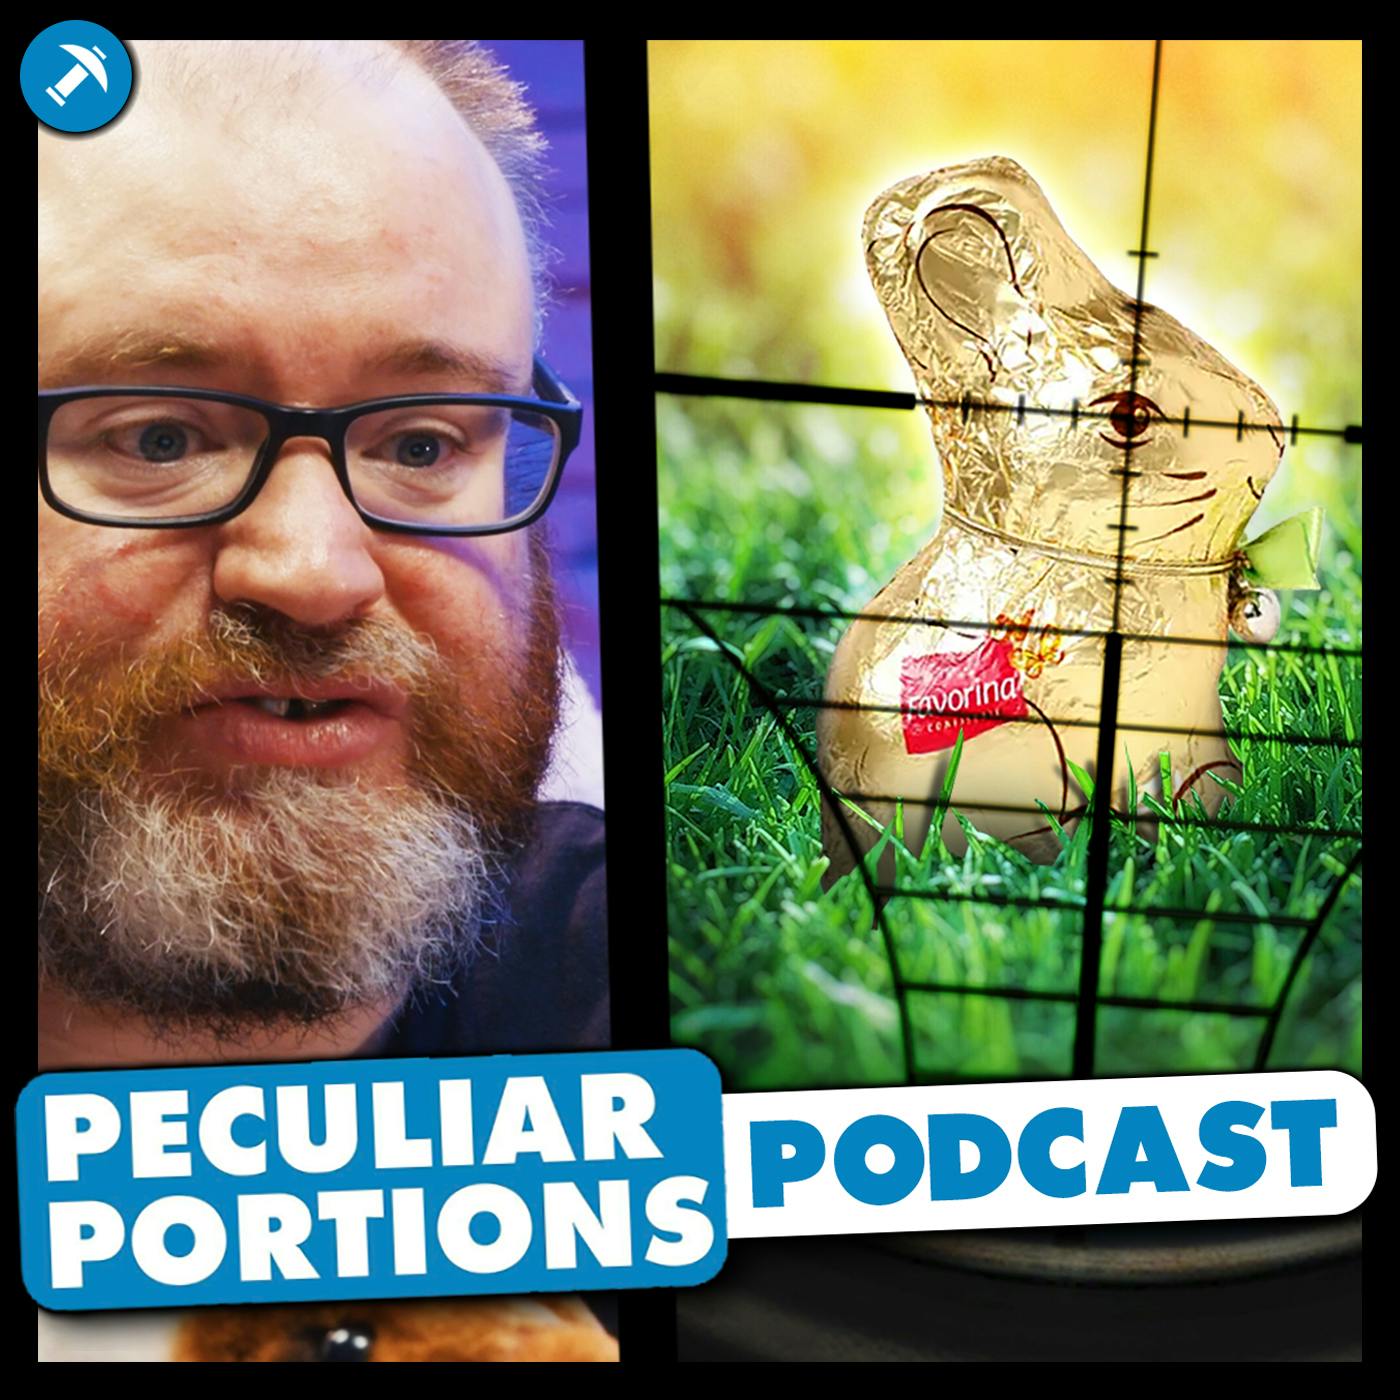 Lidl ordered to destroy bunnies - Peculiar Portions Podcast #72